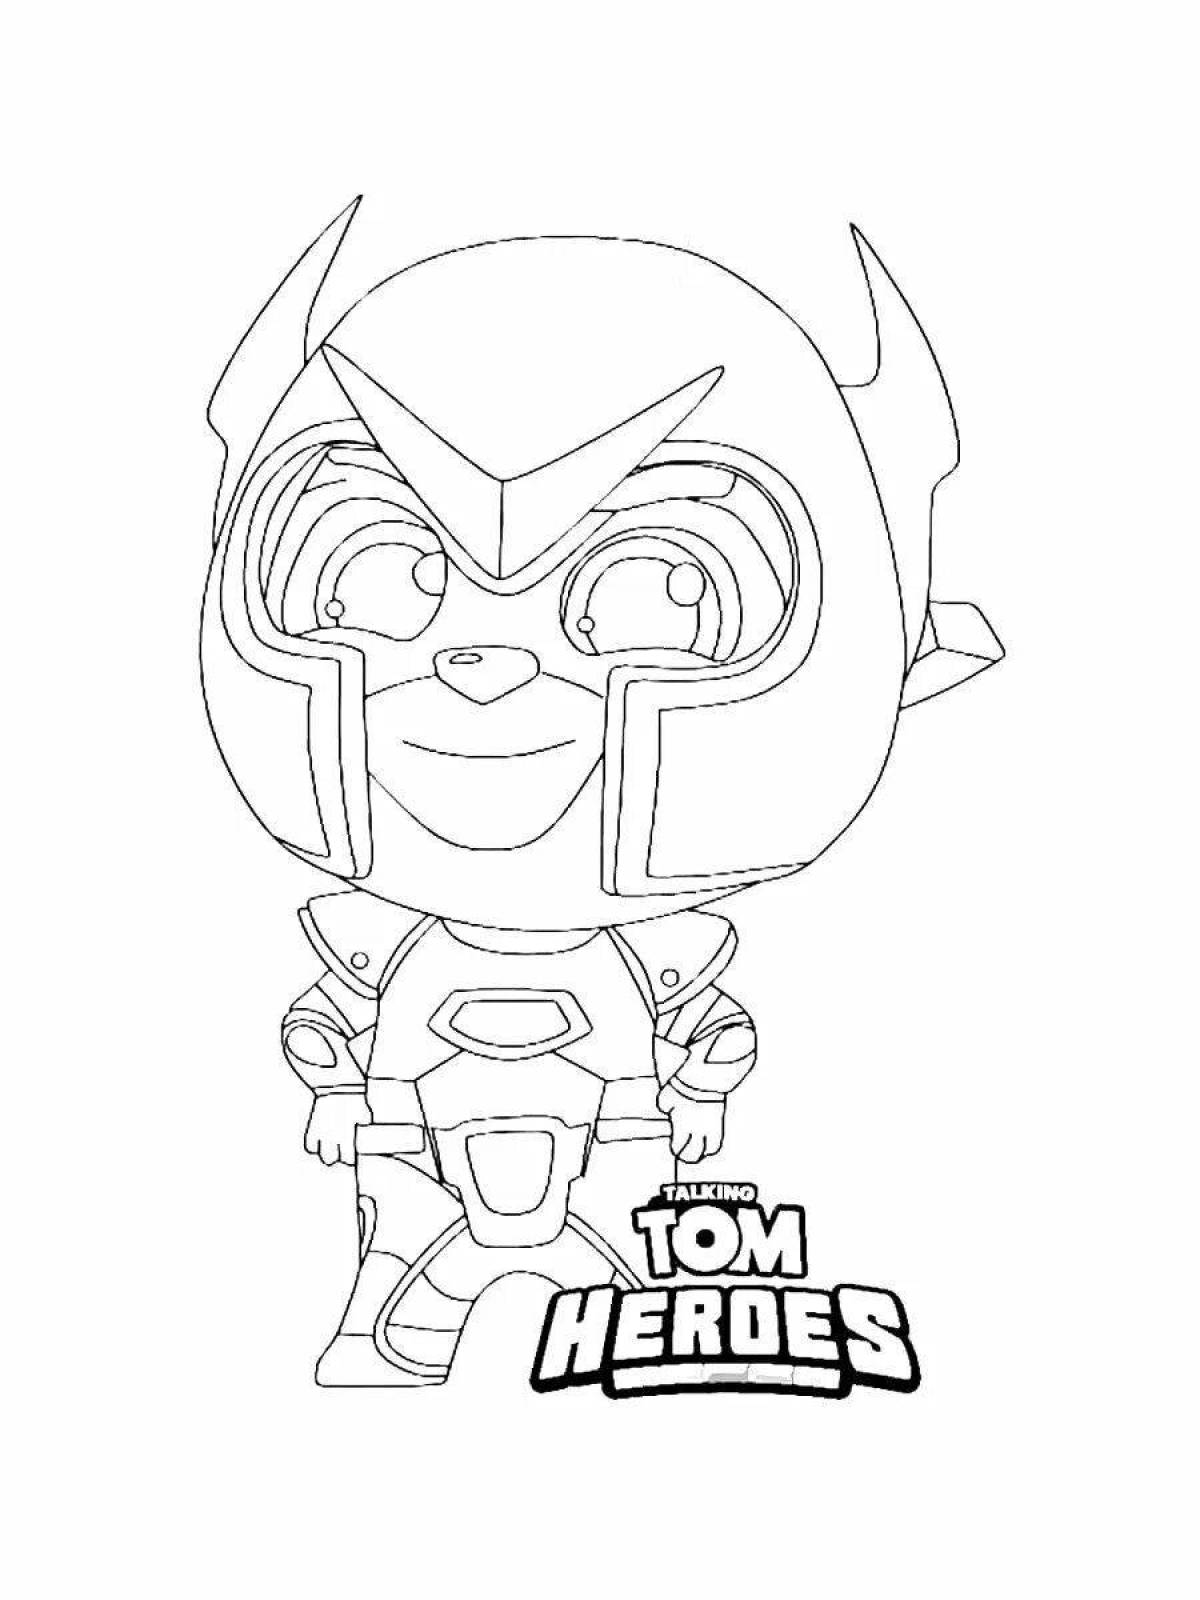 Talking Tom Hero Animated Coloring Page